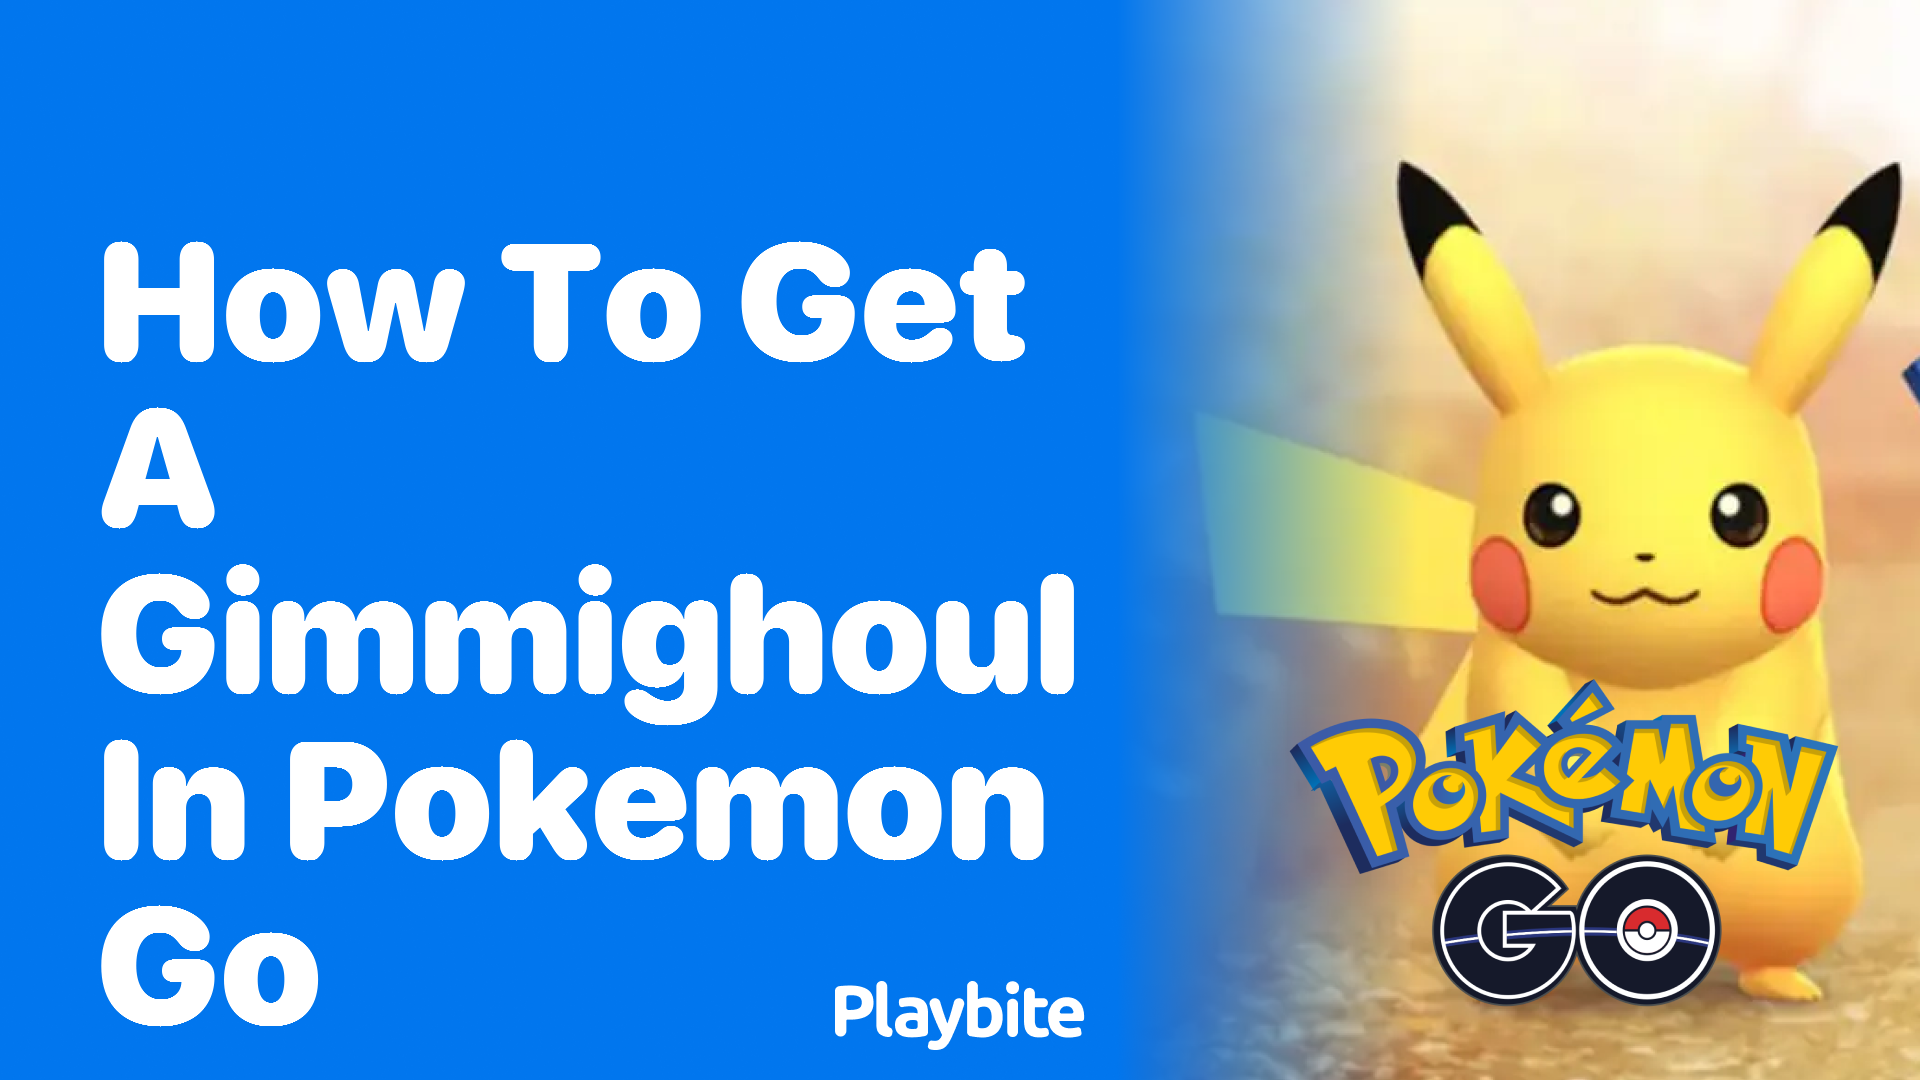 How to Catch a Gimmighoul in Pokémon GO - Playbite